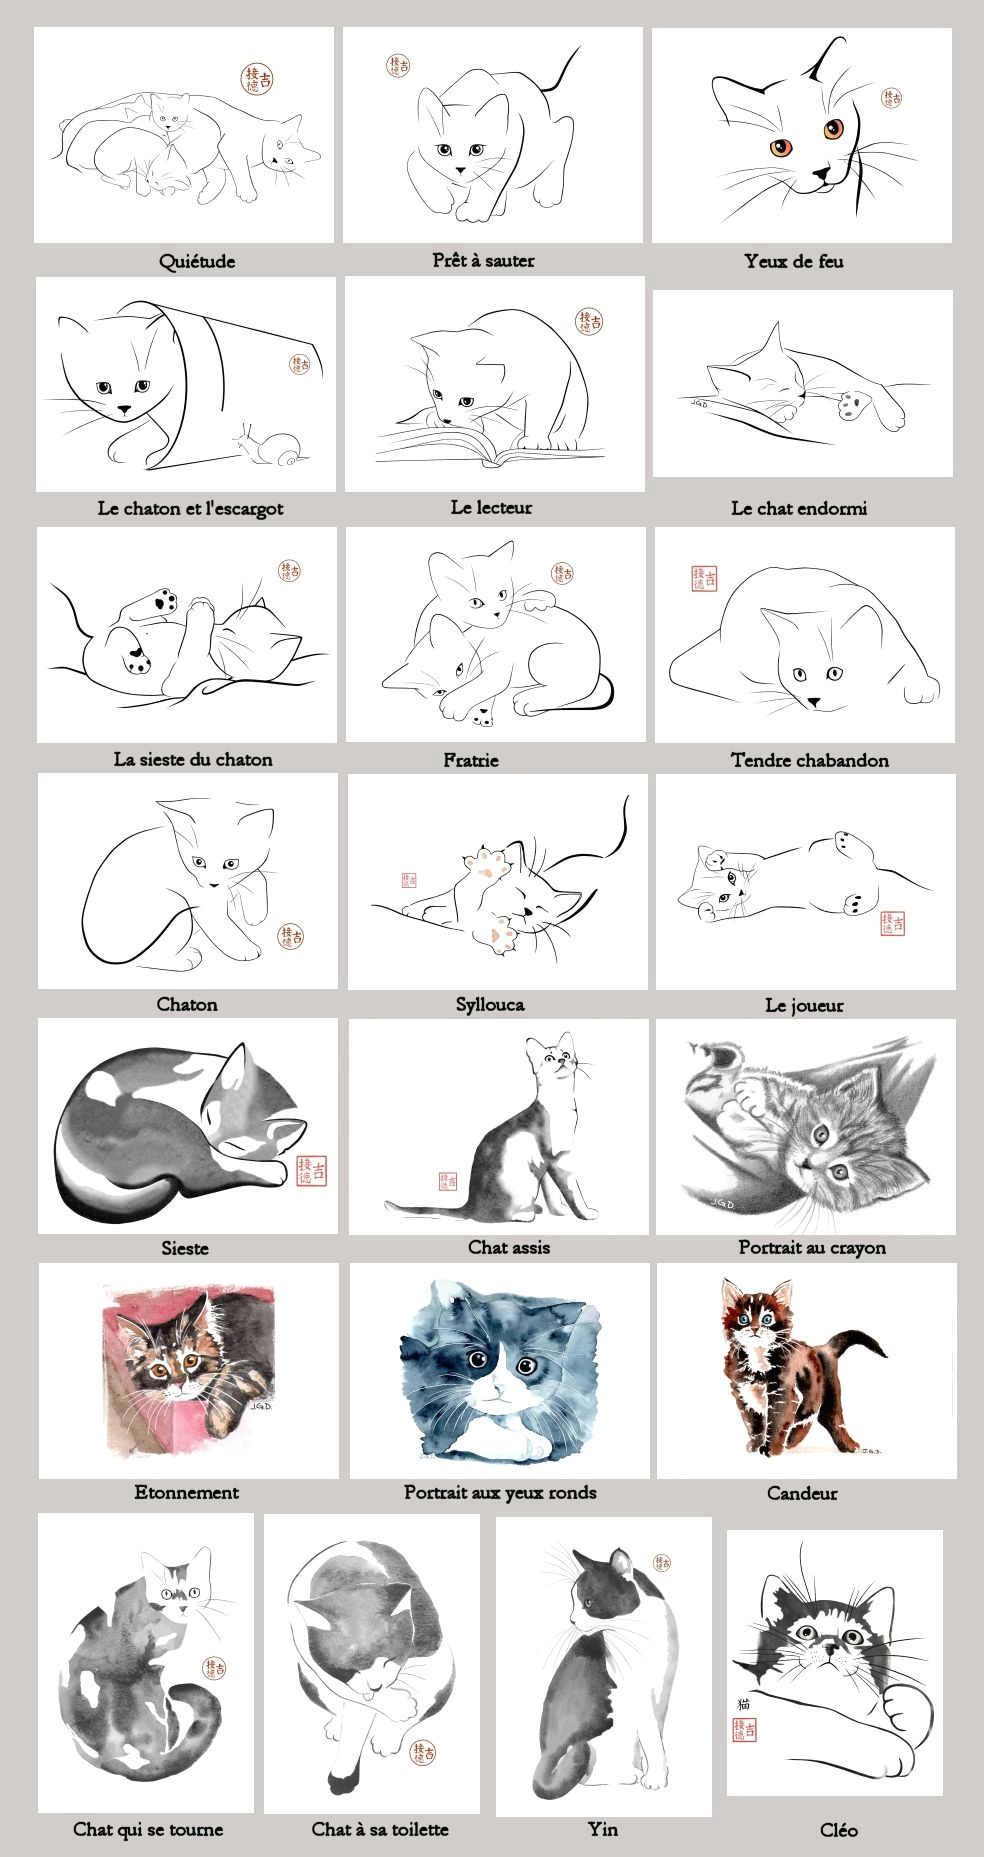 L Drawing Image Oeuvres Chats De L Artiste Ginoux Duvivier Print Inspiration